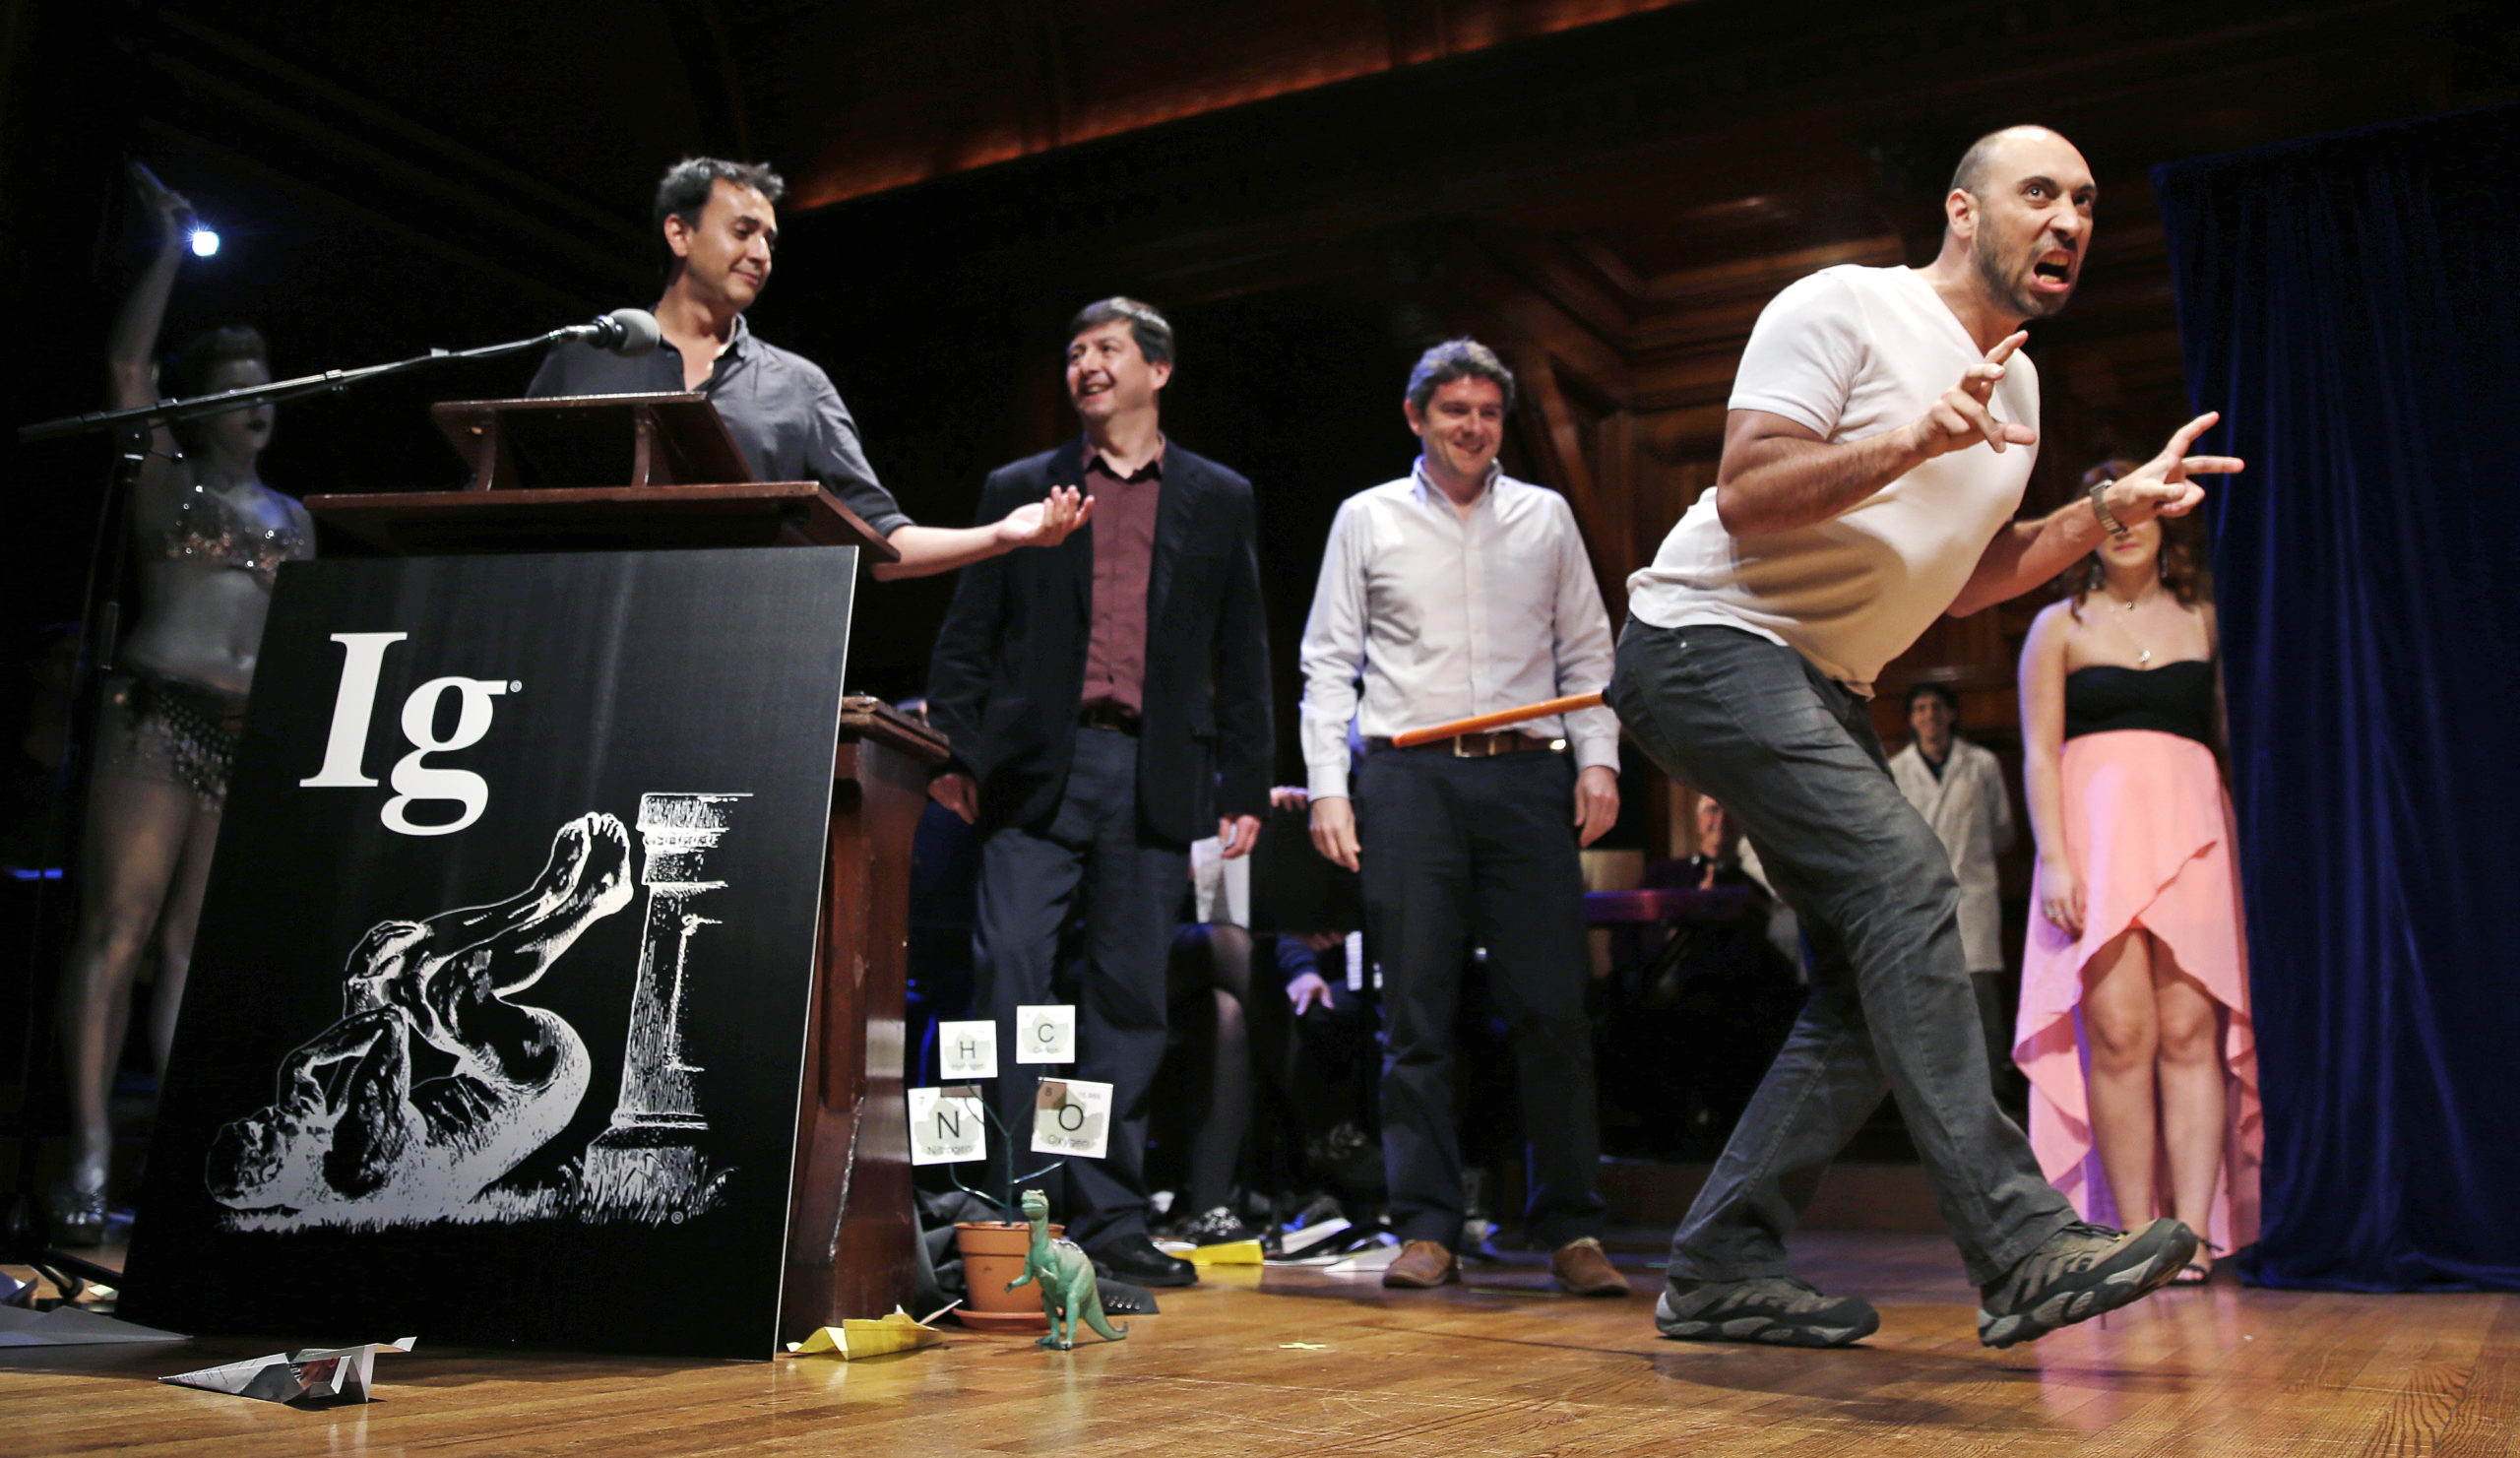 The 25th Ig Nobel Awards Were The Greatest Moment In The History Of (Silly) Science